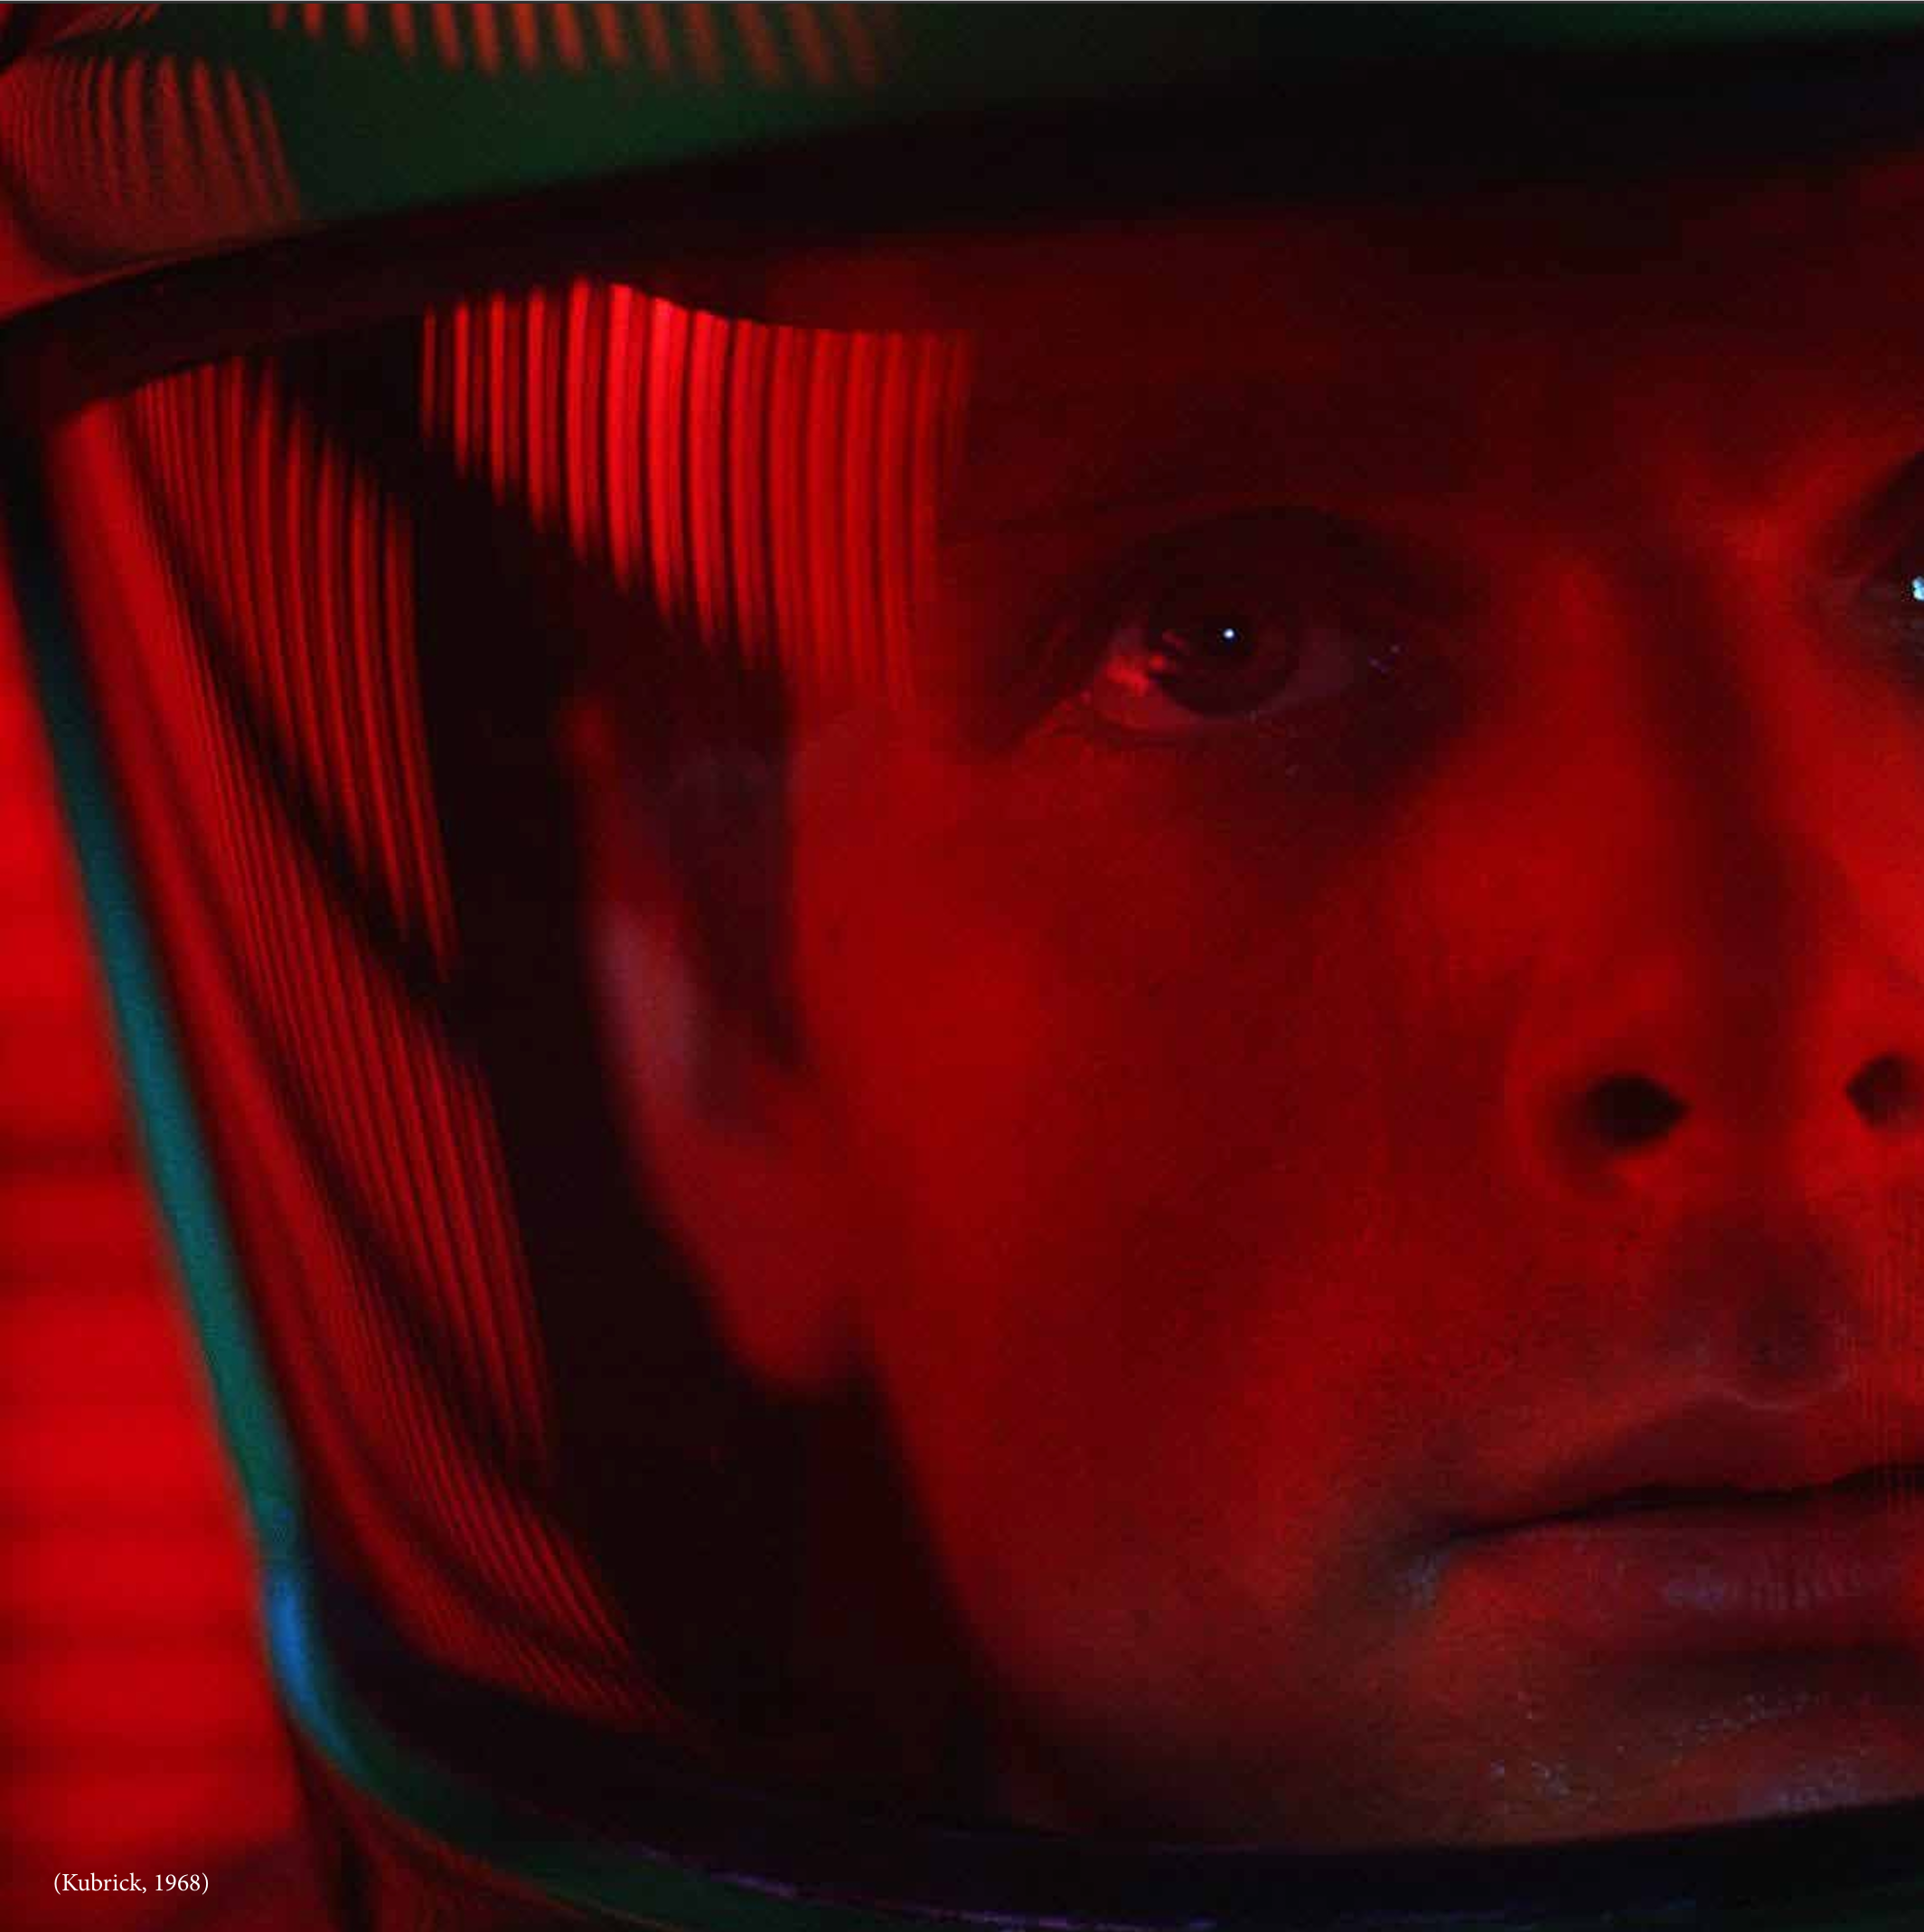 A frame from the movie 2001: A Space Odyssey that is covered in red showing anxiety and danger